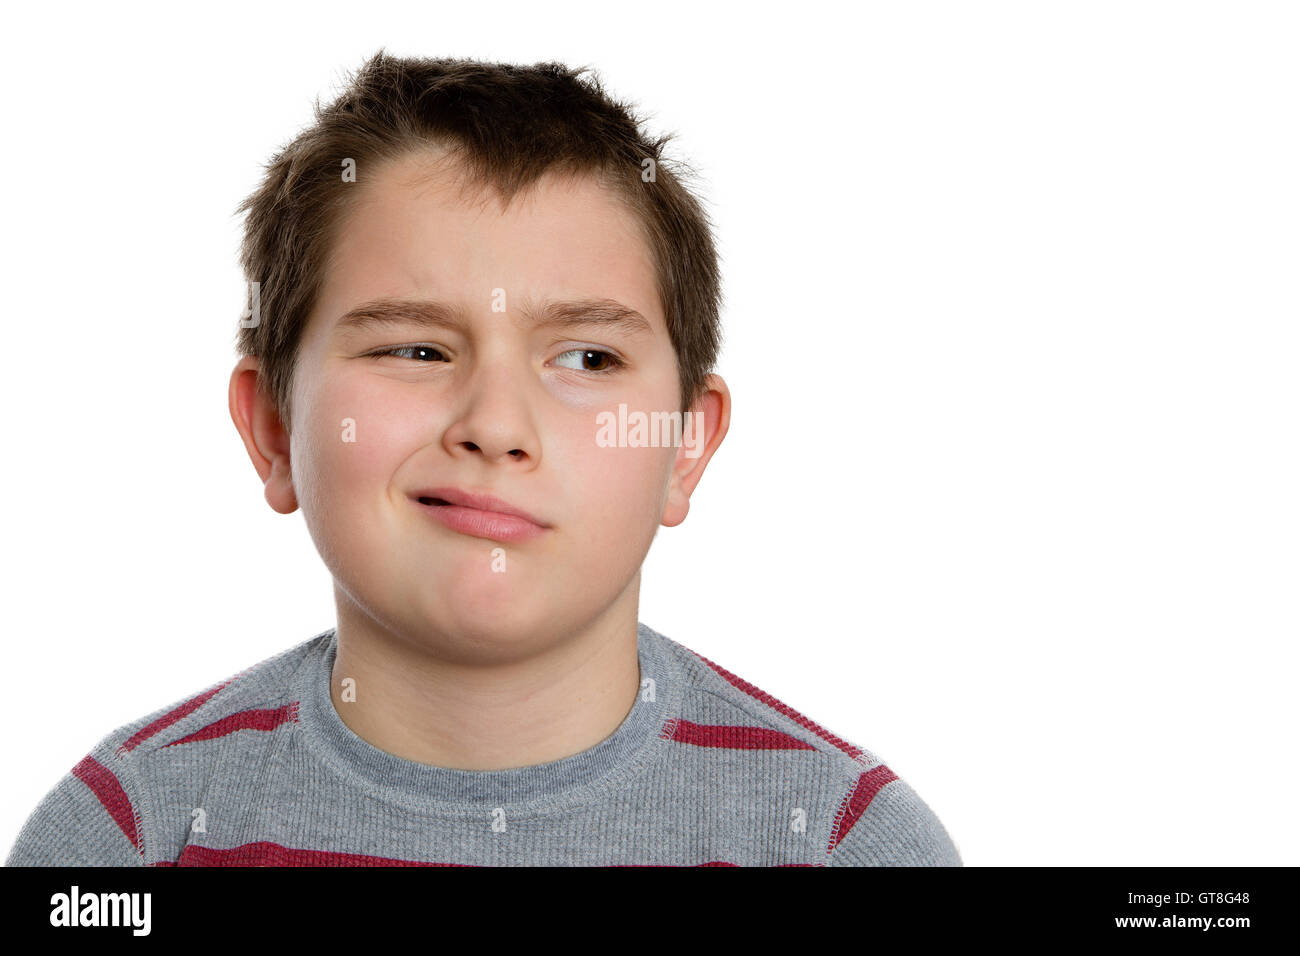 Close up Ten Year Old Boy Looking to the Right with Bored Facial Expression, Isolated on White Background. Stock Photo